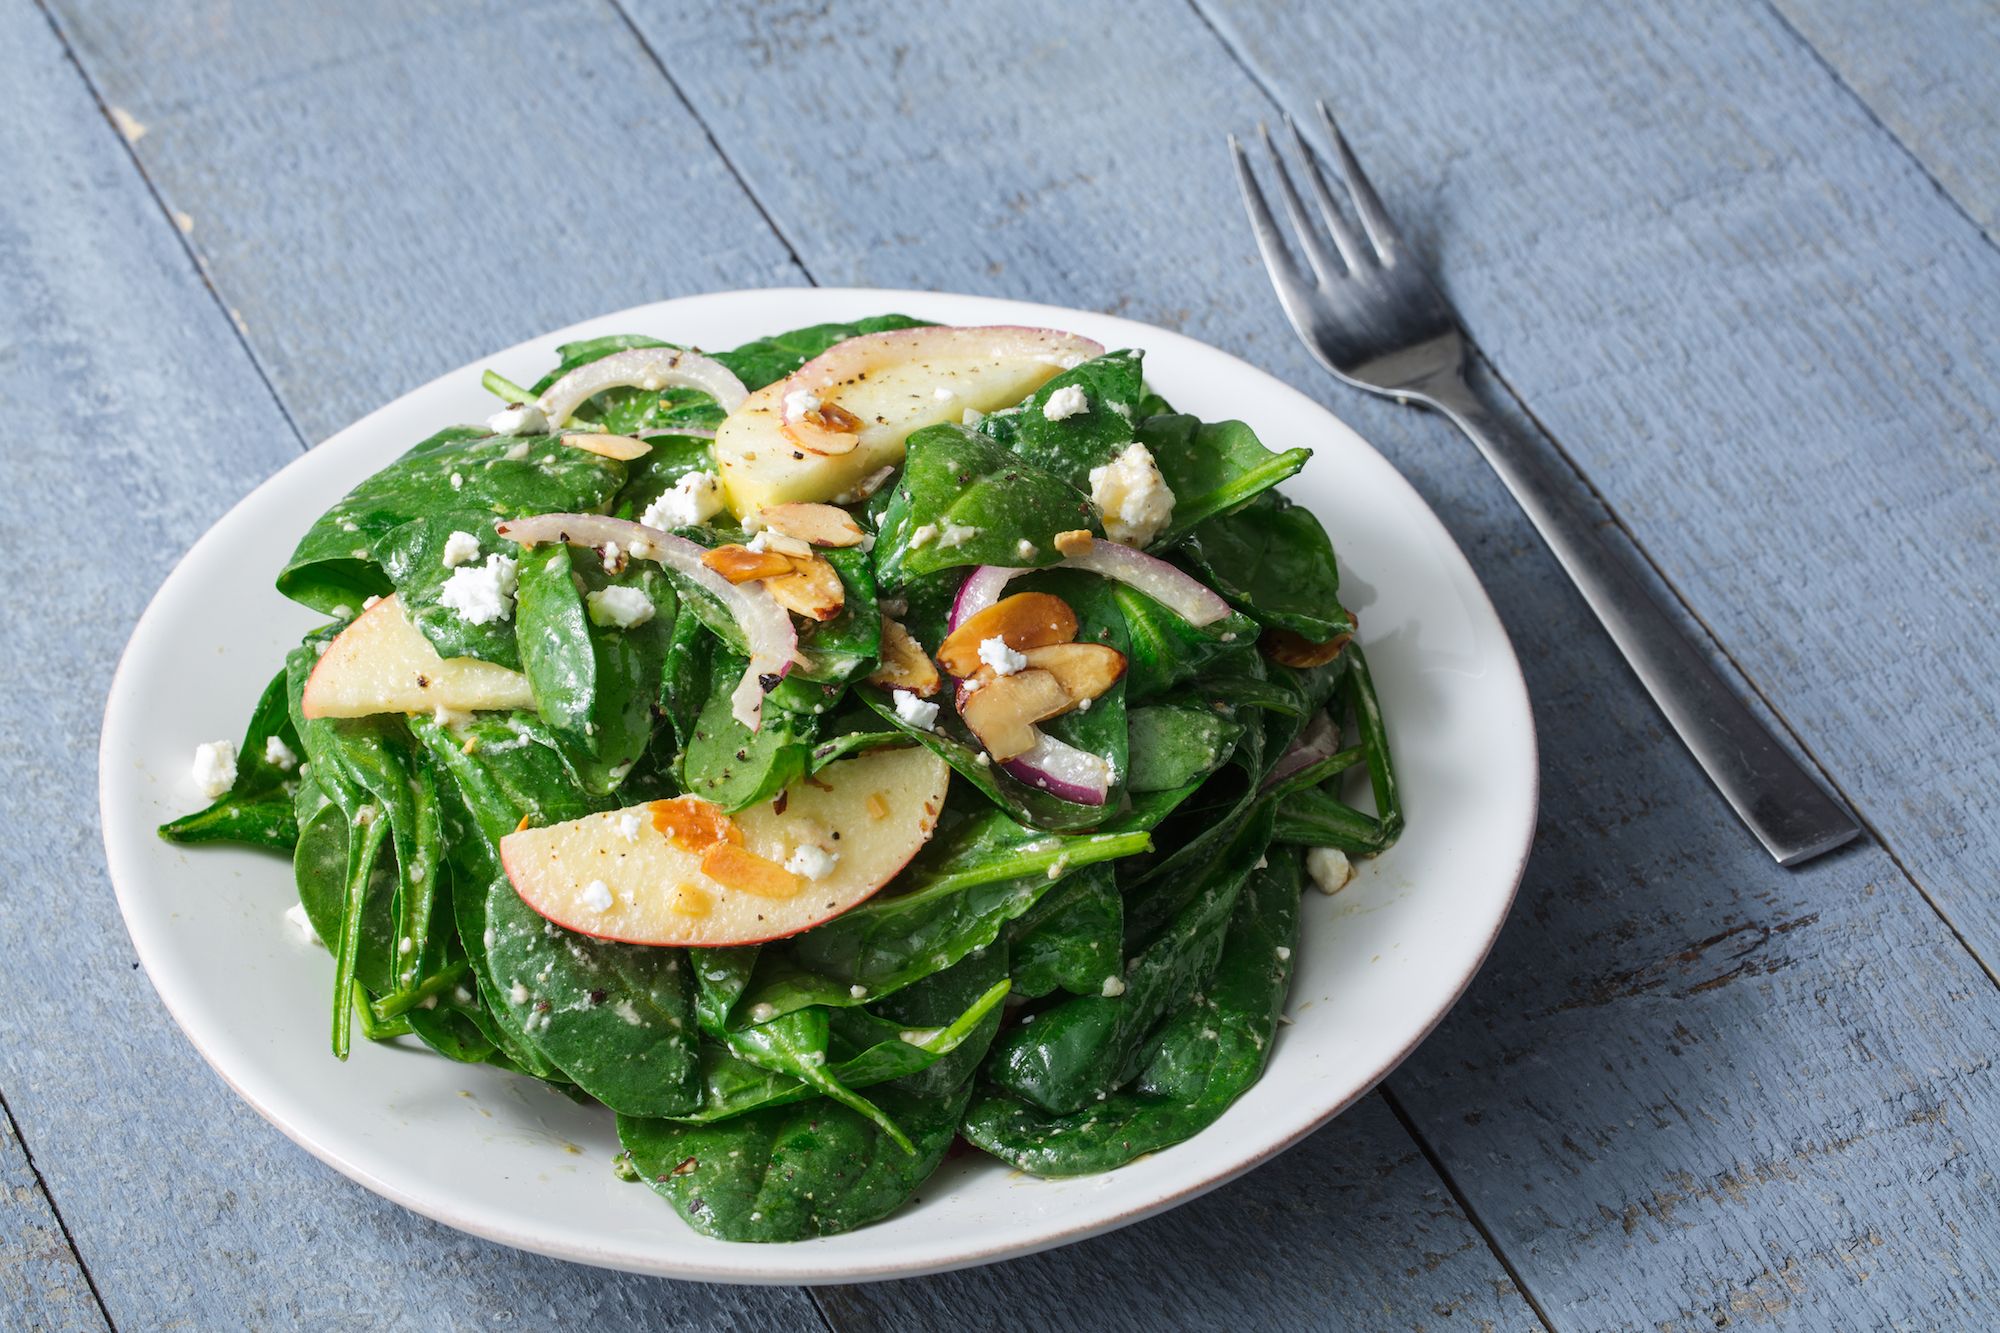 Image of Spinach salad